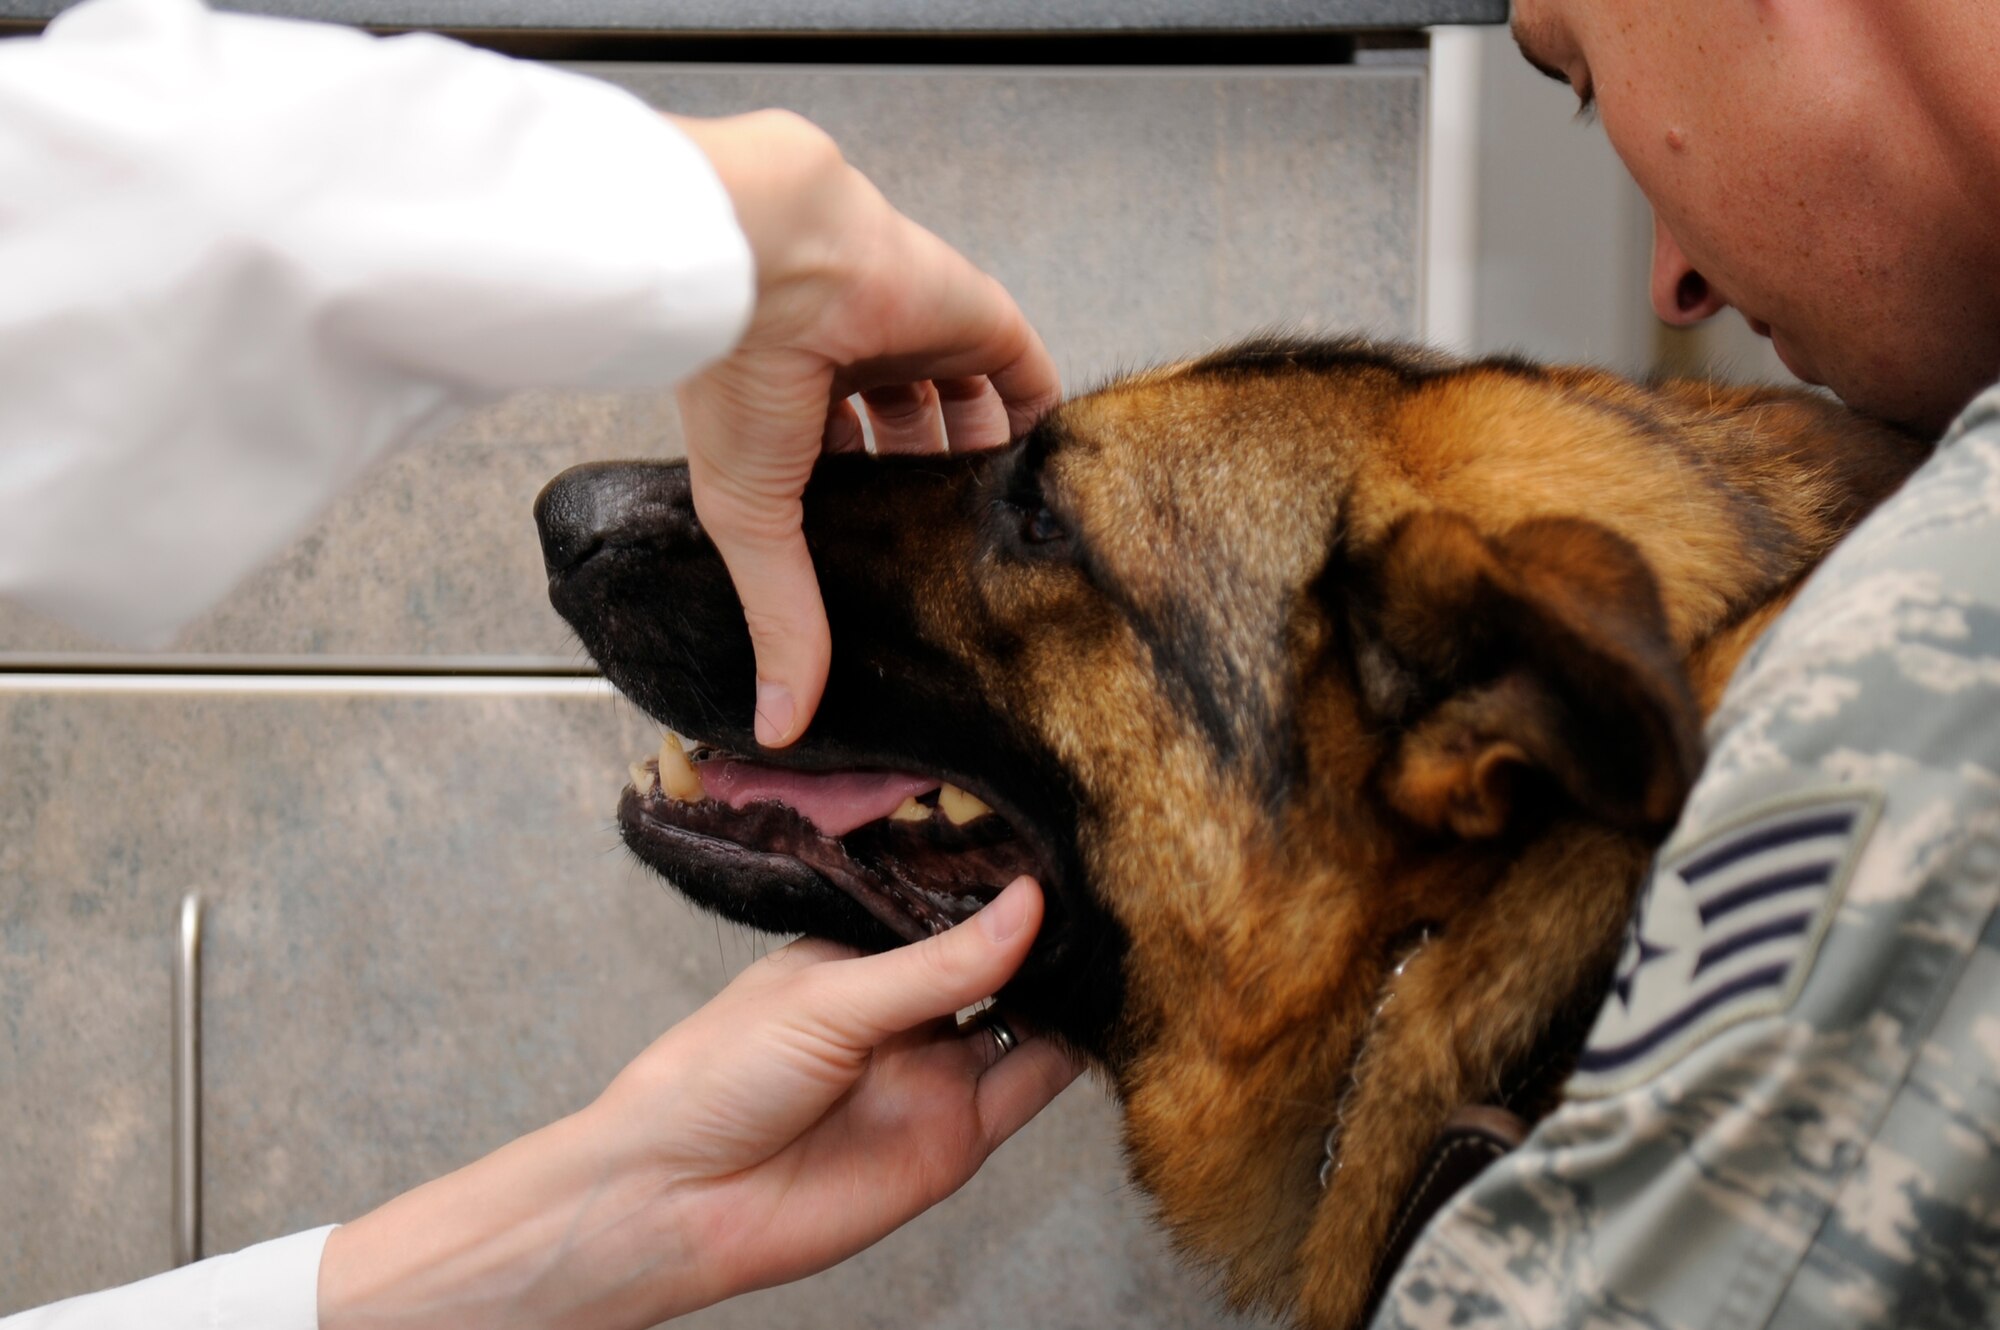 Joanne Kucker, 509th Medical Group veterinarian, checks the dental health of Bak, 509th Security Forces Squadron military working dog. Bak was receiving a health certificate required by USDA before military working dogs travel. (U.S. Air Force photo by Airman 1st Class Cody H. Ramirez)